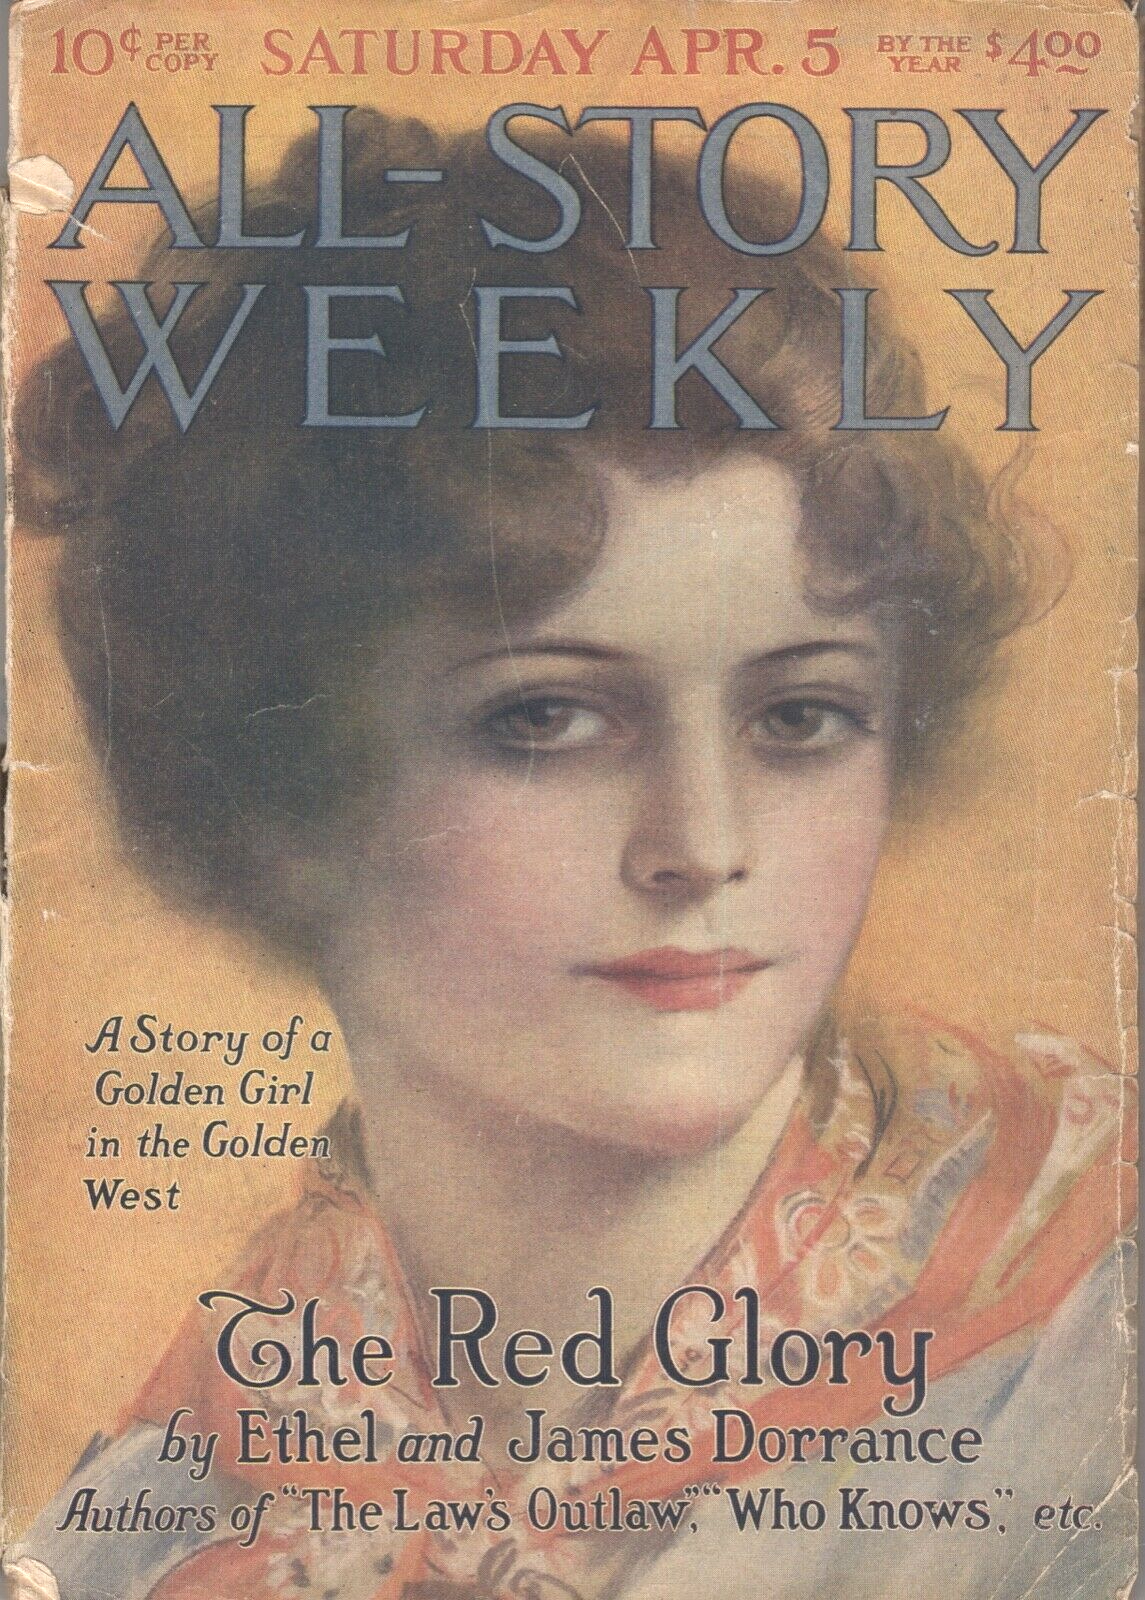 All-Story Weekly - April 5 1919